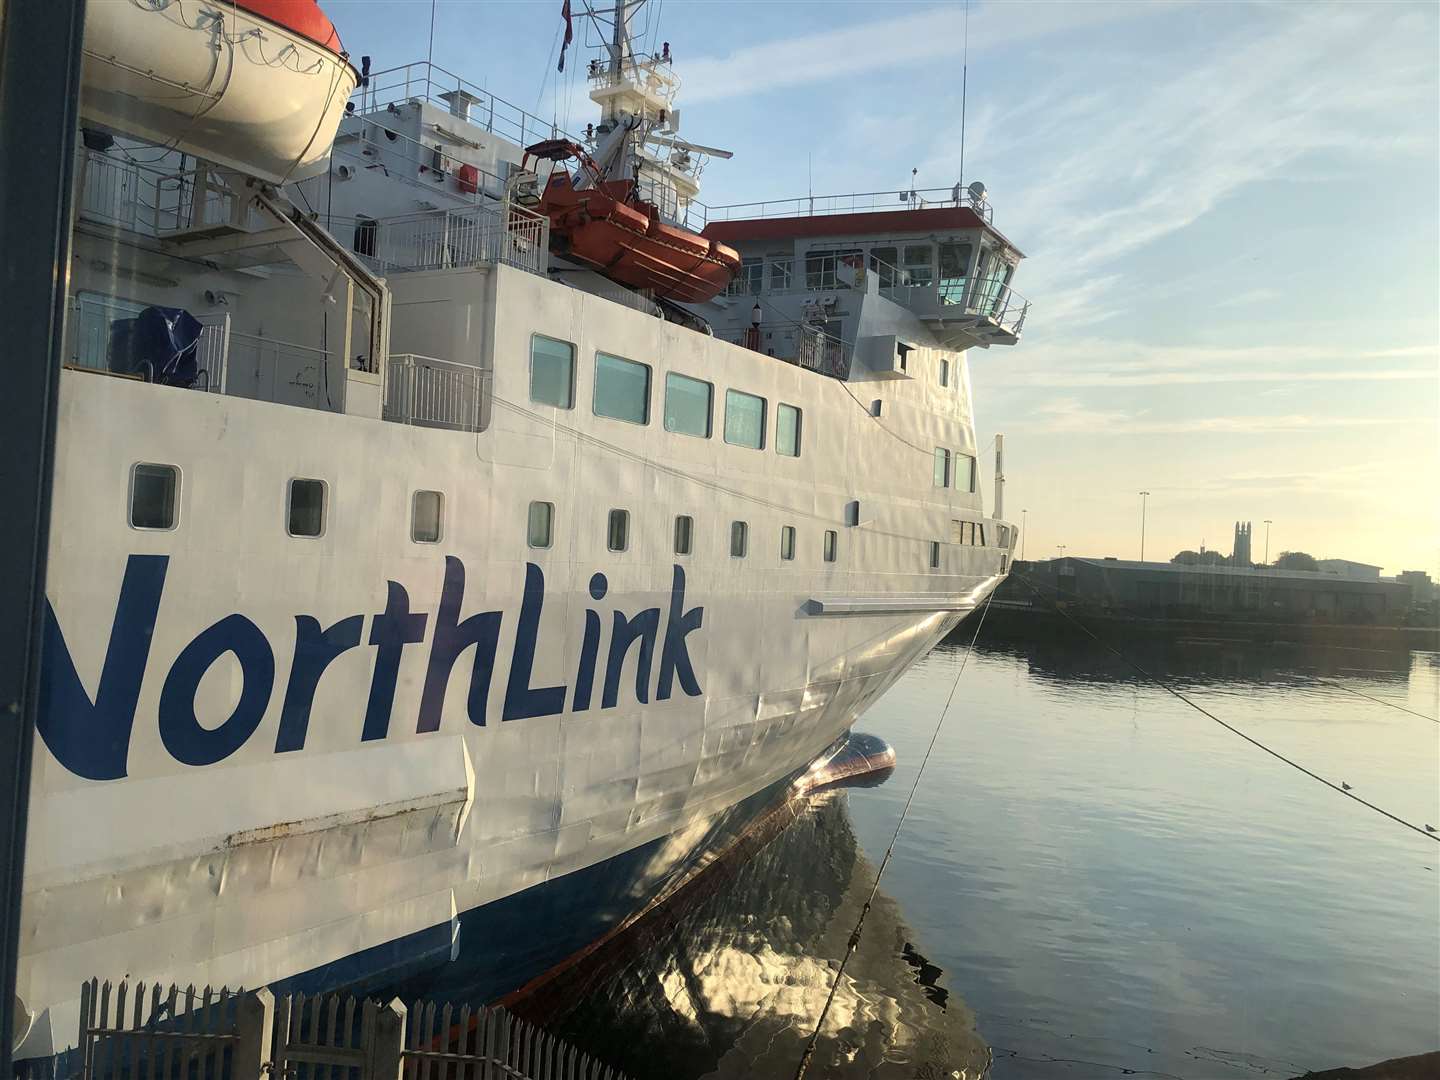 Serco NorthLink Ferries is among the companies that have received support in previous rounds of the Ferries Accessibility Fund.